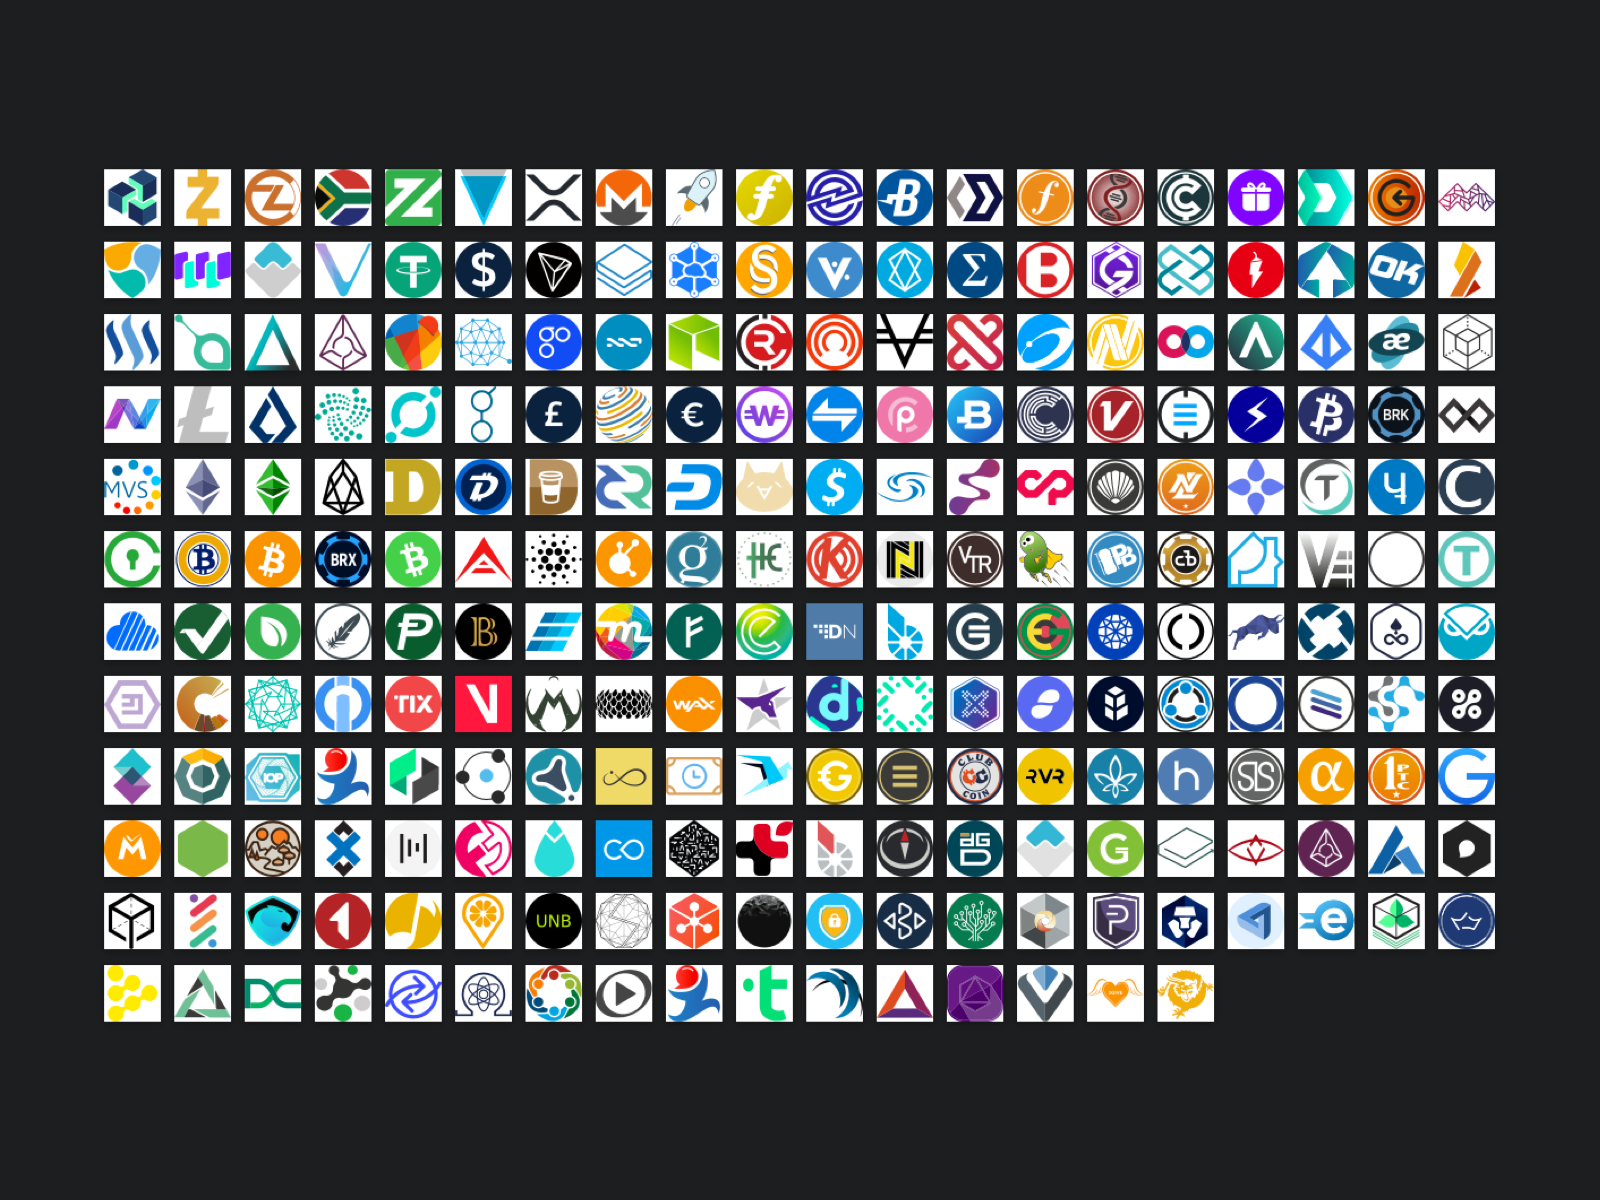 FREE SKETCH FILE - Crypto Currency SVG Icons by Anja van ...